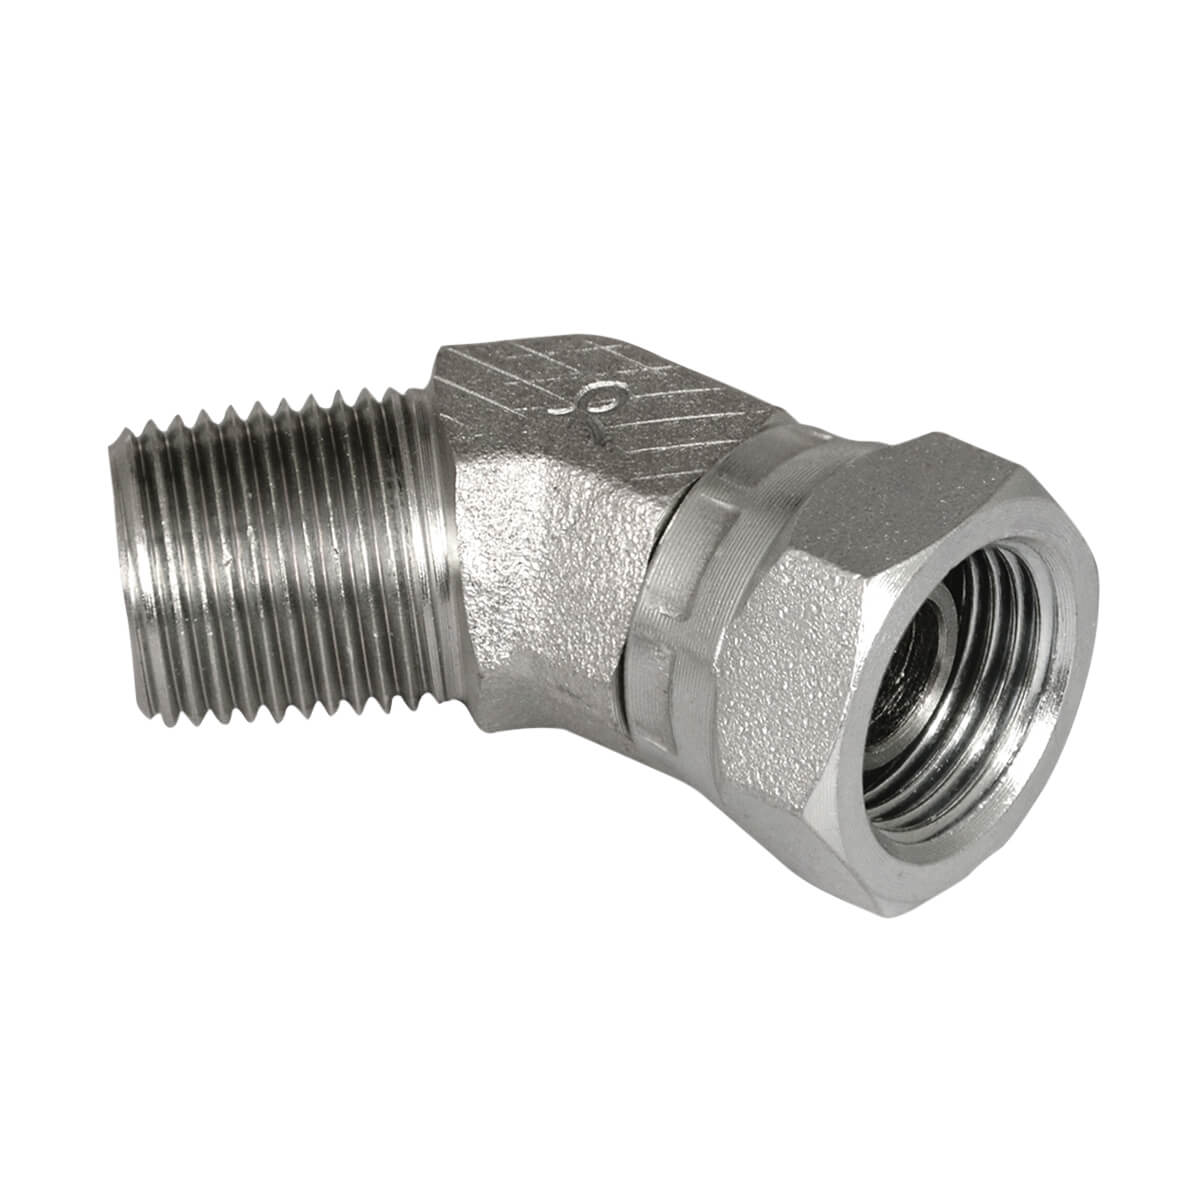 Swivel Hydraulic Adapter - 1/2-in MPT x 1/2-in FPT 45 Degree